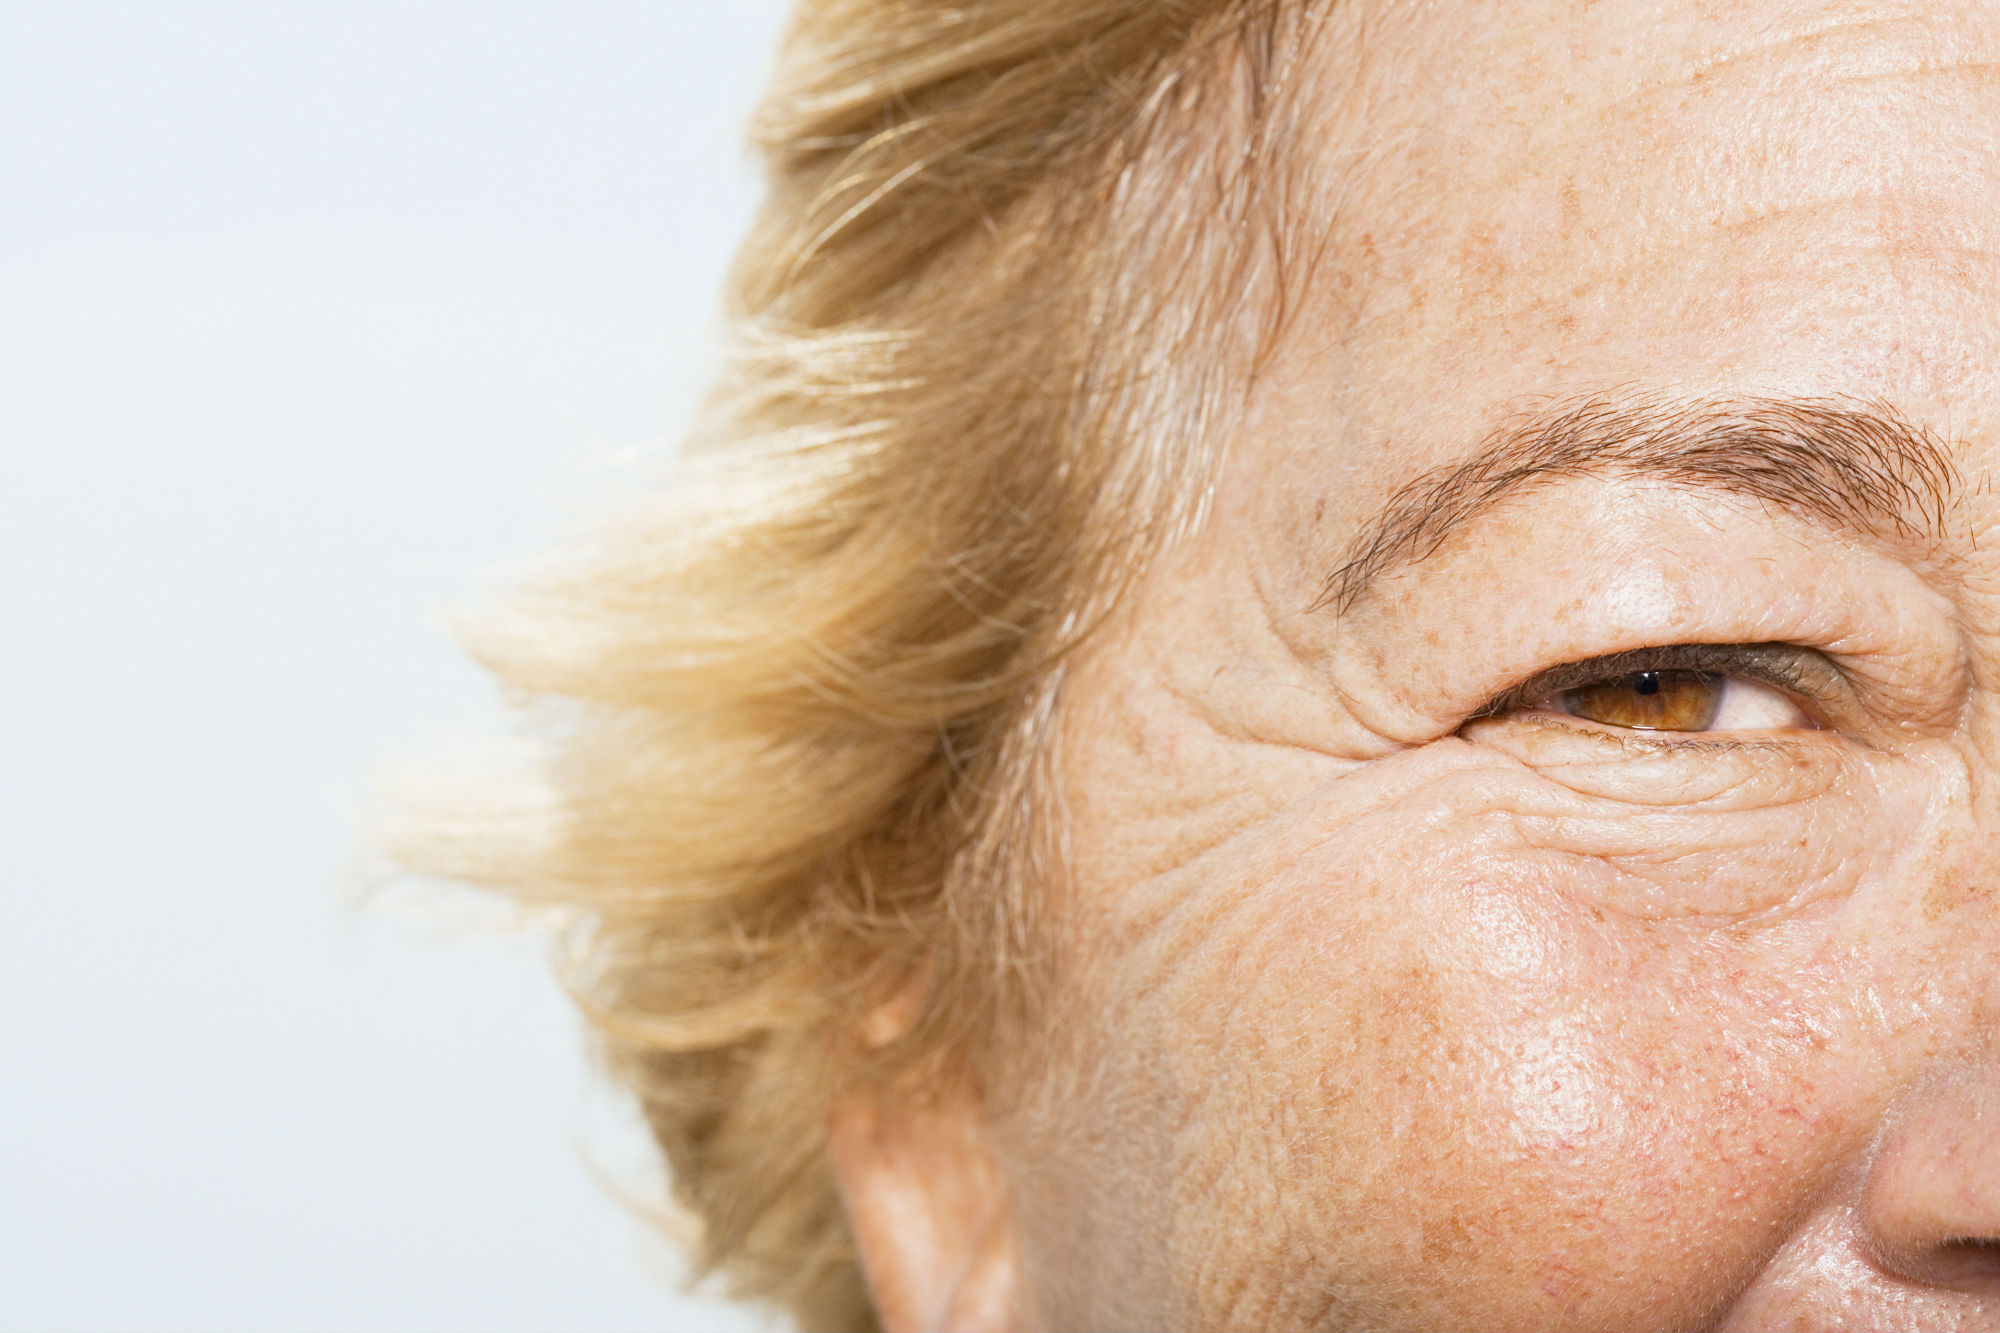 What Type of Wrinkles Do You Have? And How to Treat Them?